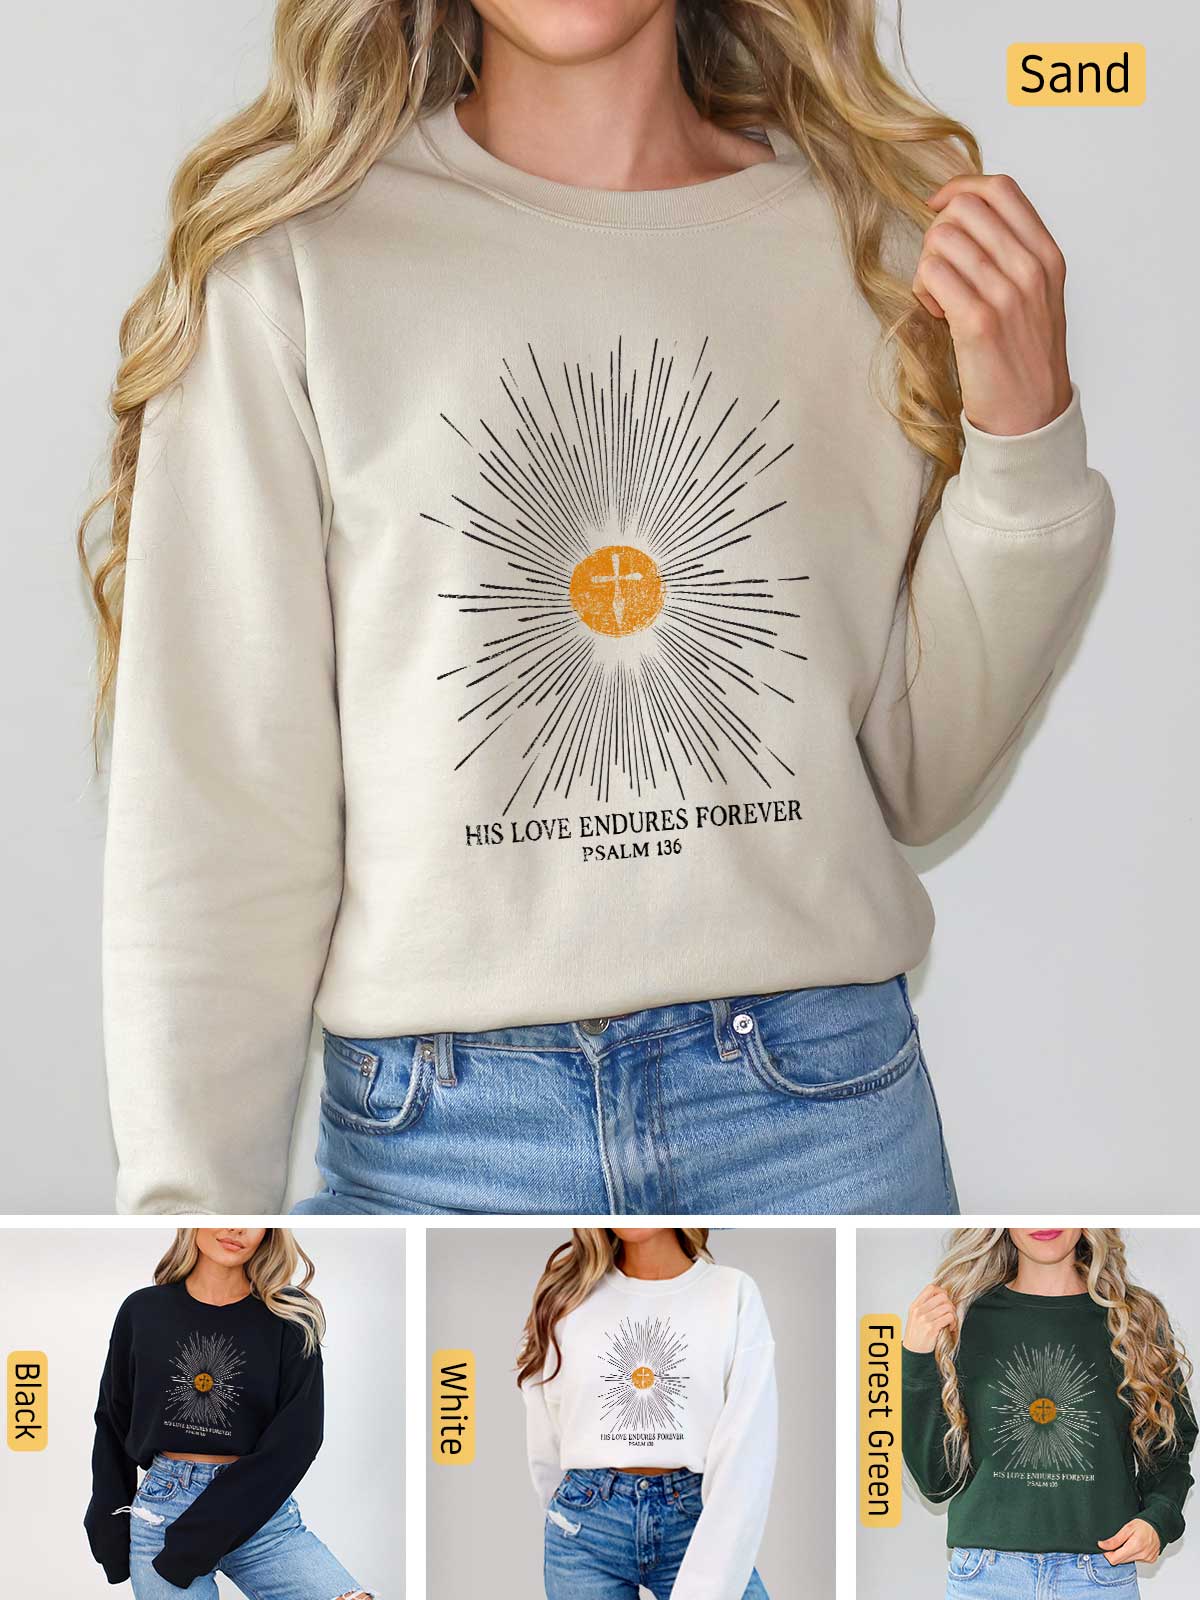 a woman wearing a sweatshirt with a sun graphic on it